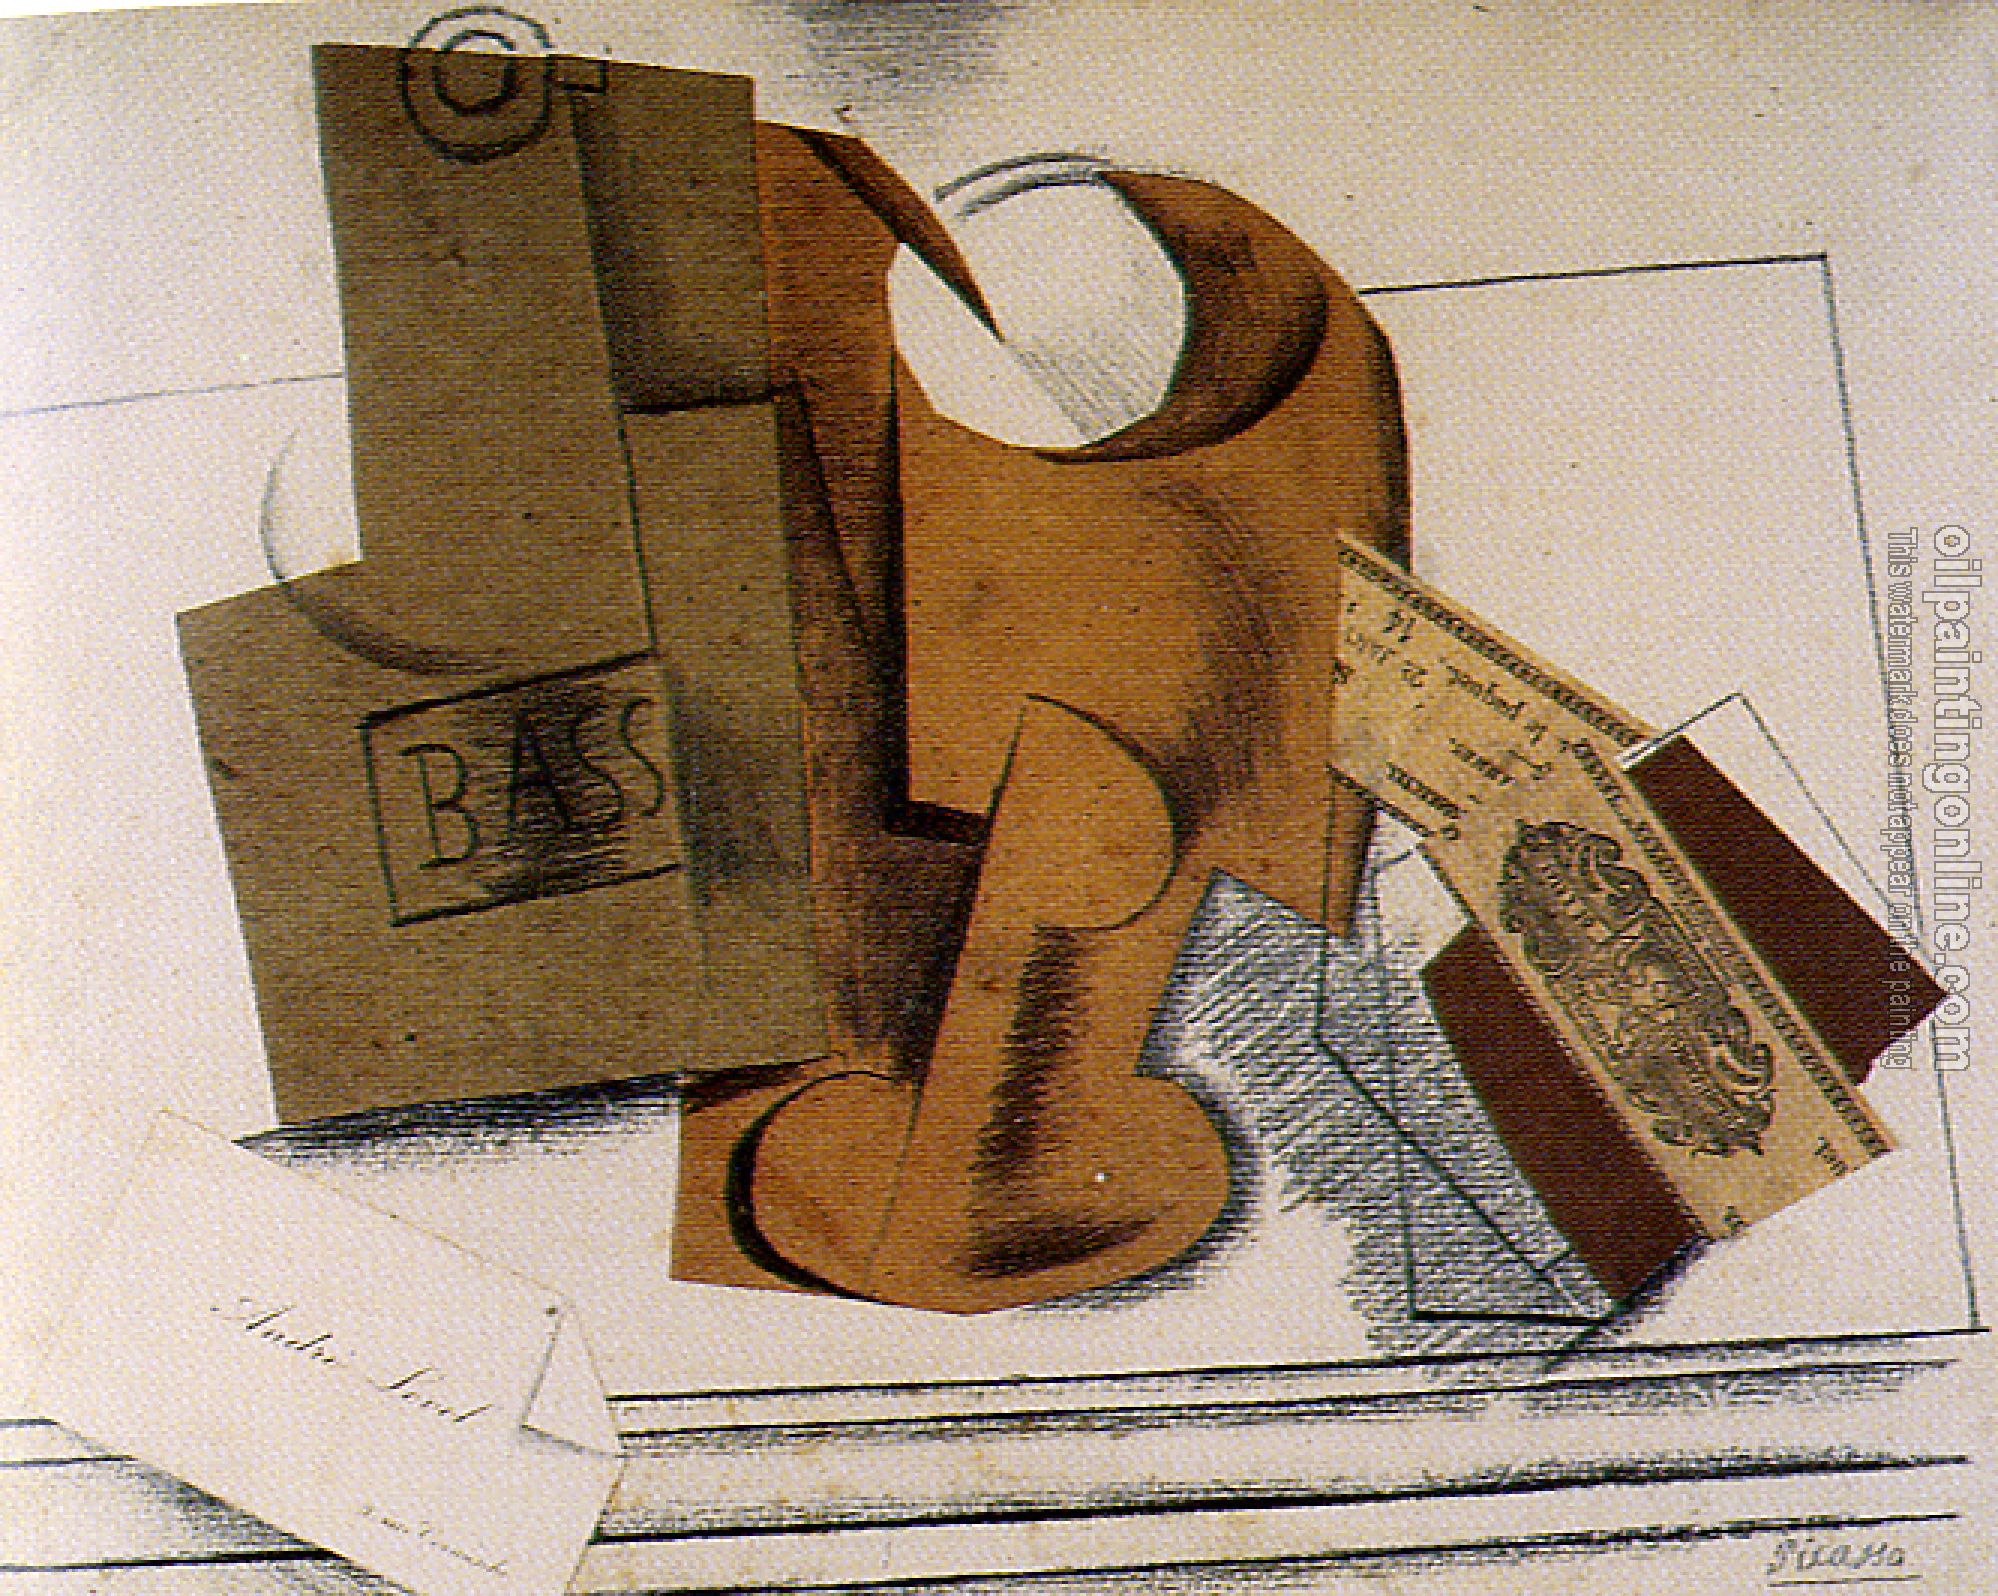 Picasso, Pablo - bottle of bass and calling card